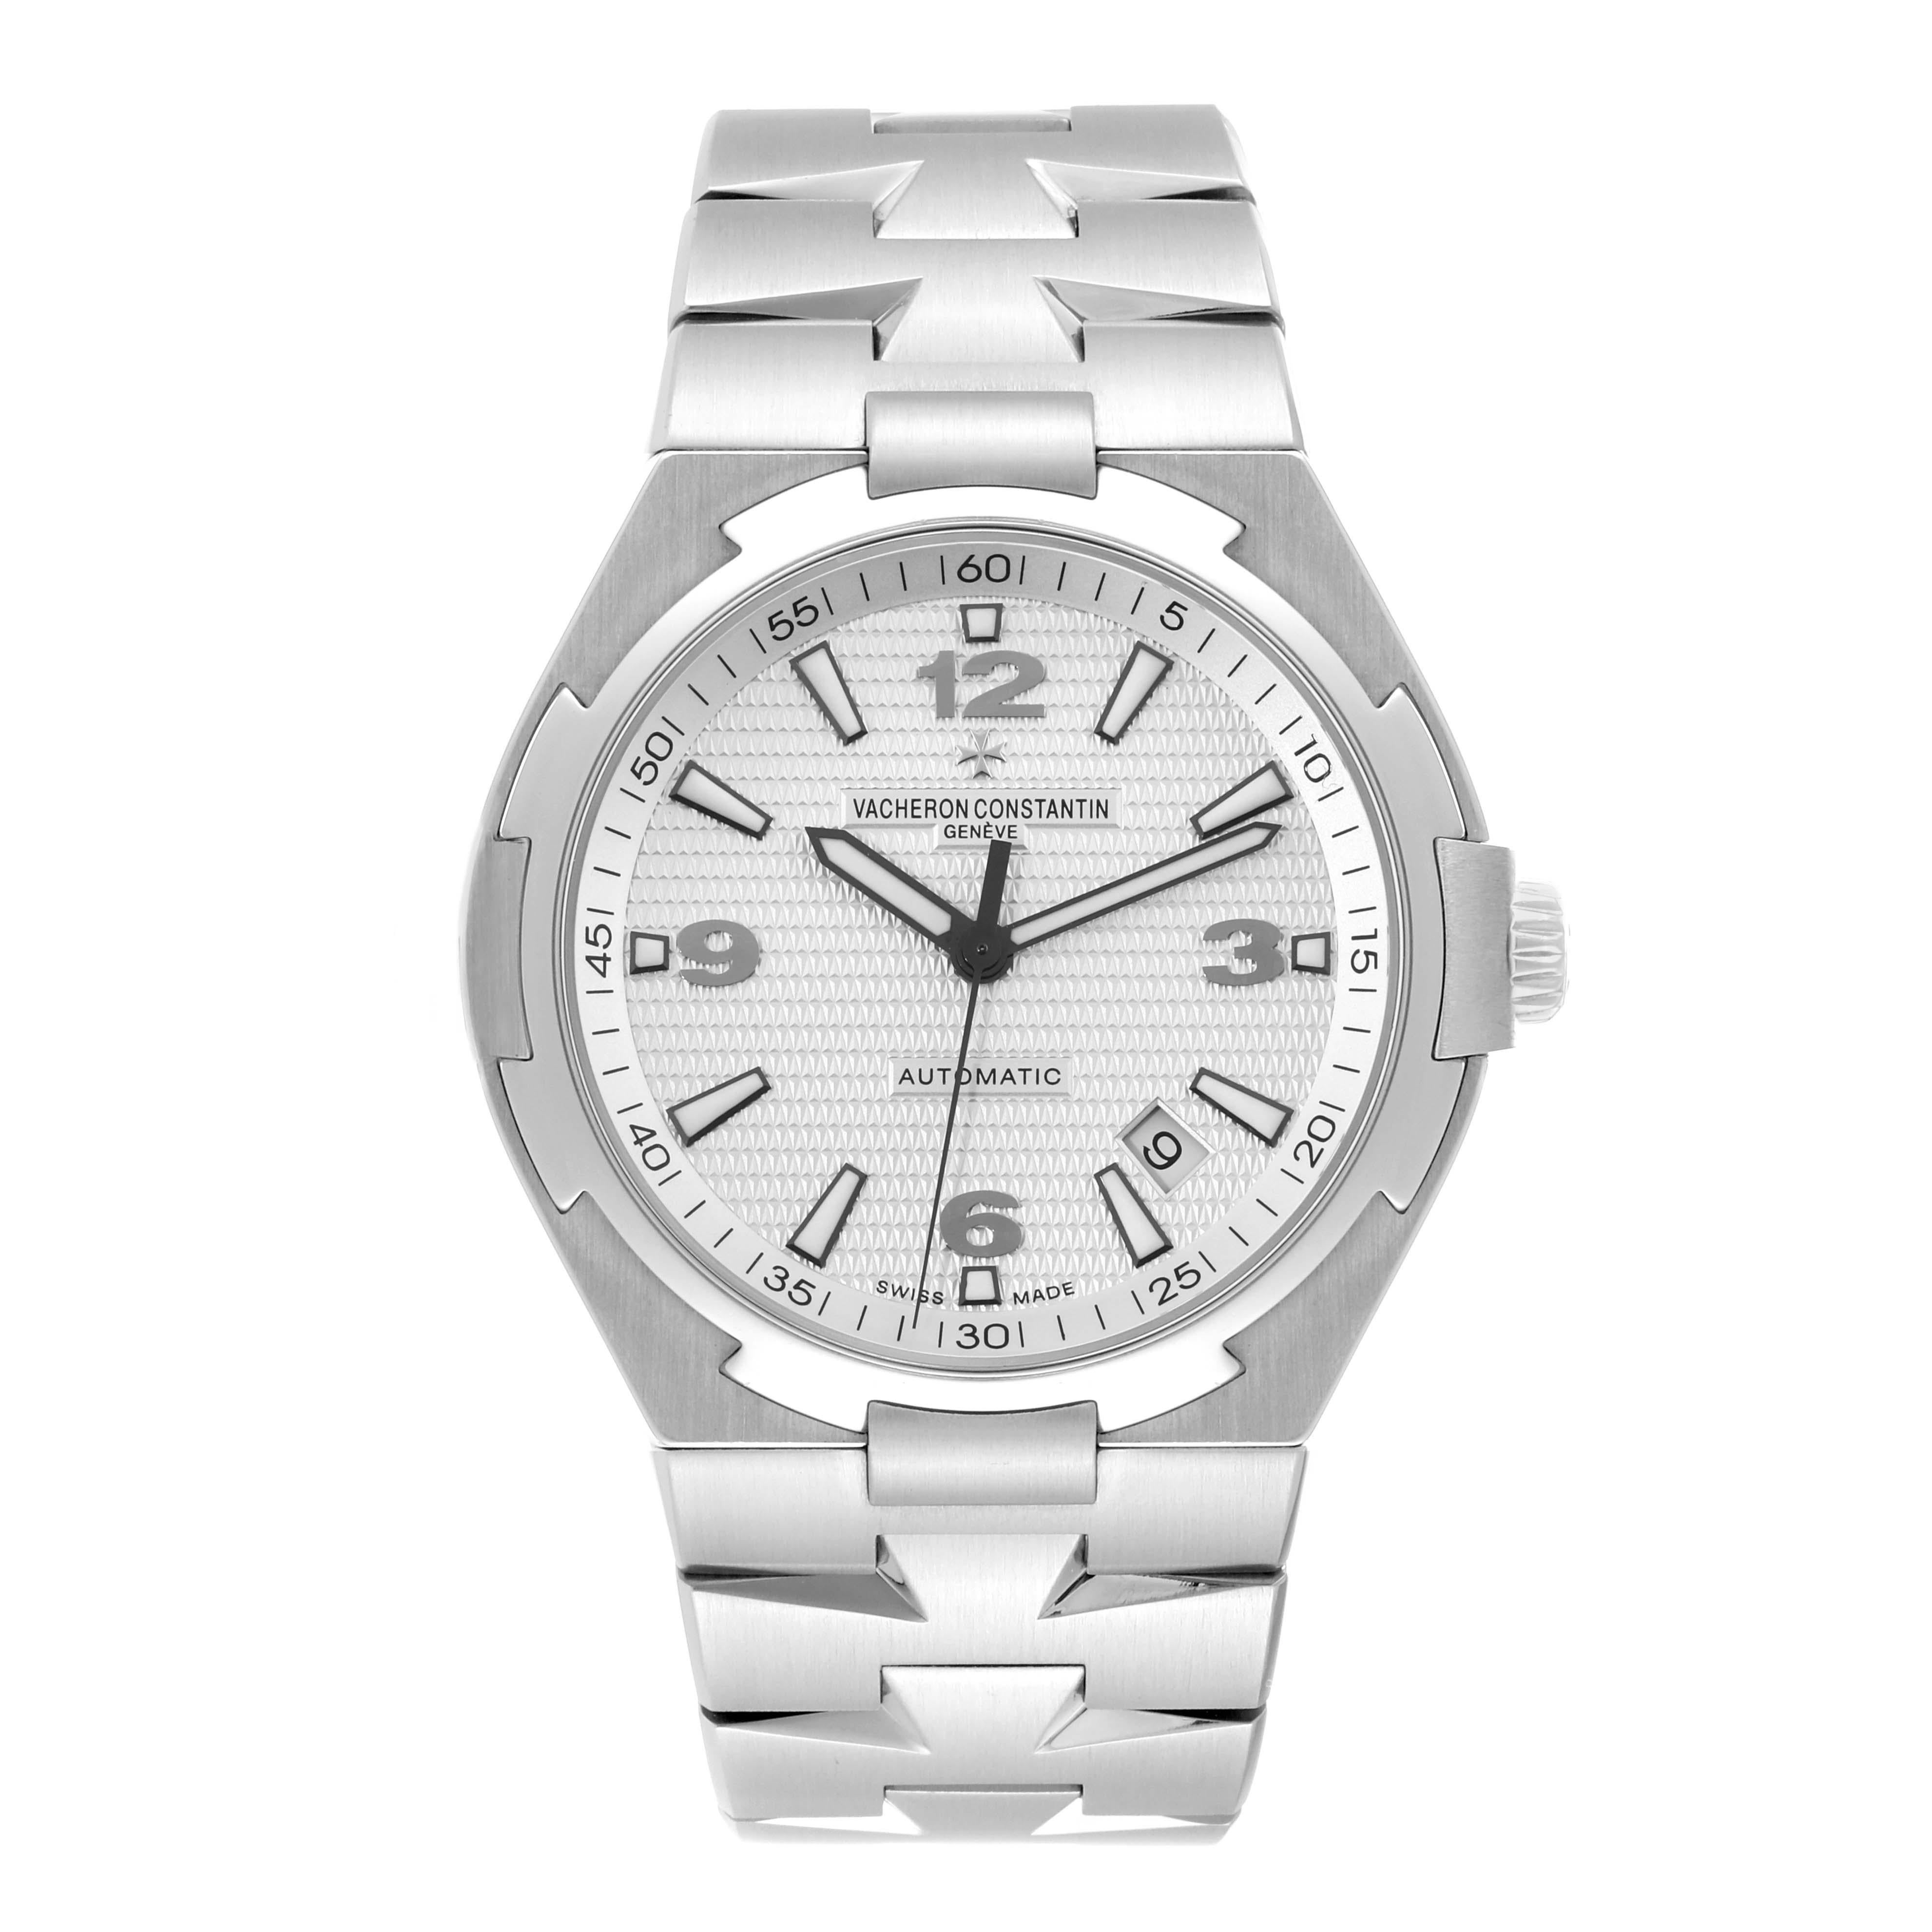 Vacheron Constantin Overseas Silver Dial Steel Mens Watch 47040. Automatic self-winding movement. Brushed stainless steel case 42.5 mm in diameter. Screwed down crown with Vacheron logo. Solid caseback with 'overseas' medallion. Polished stainless